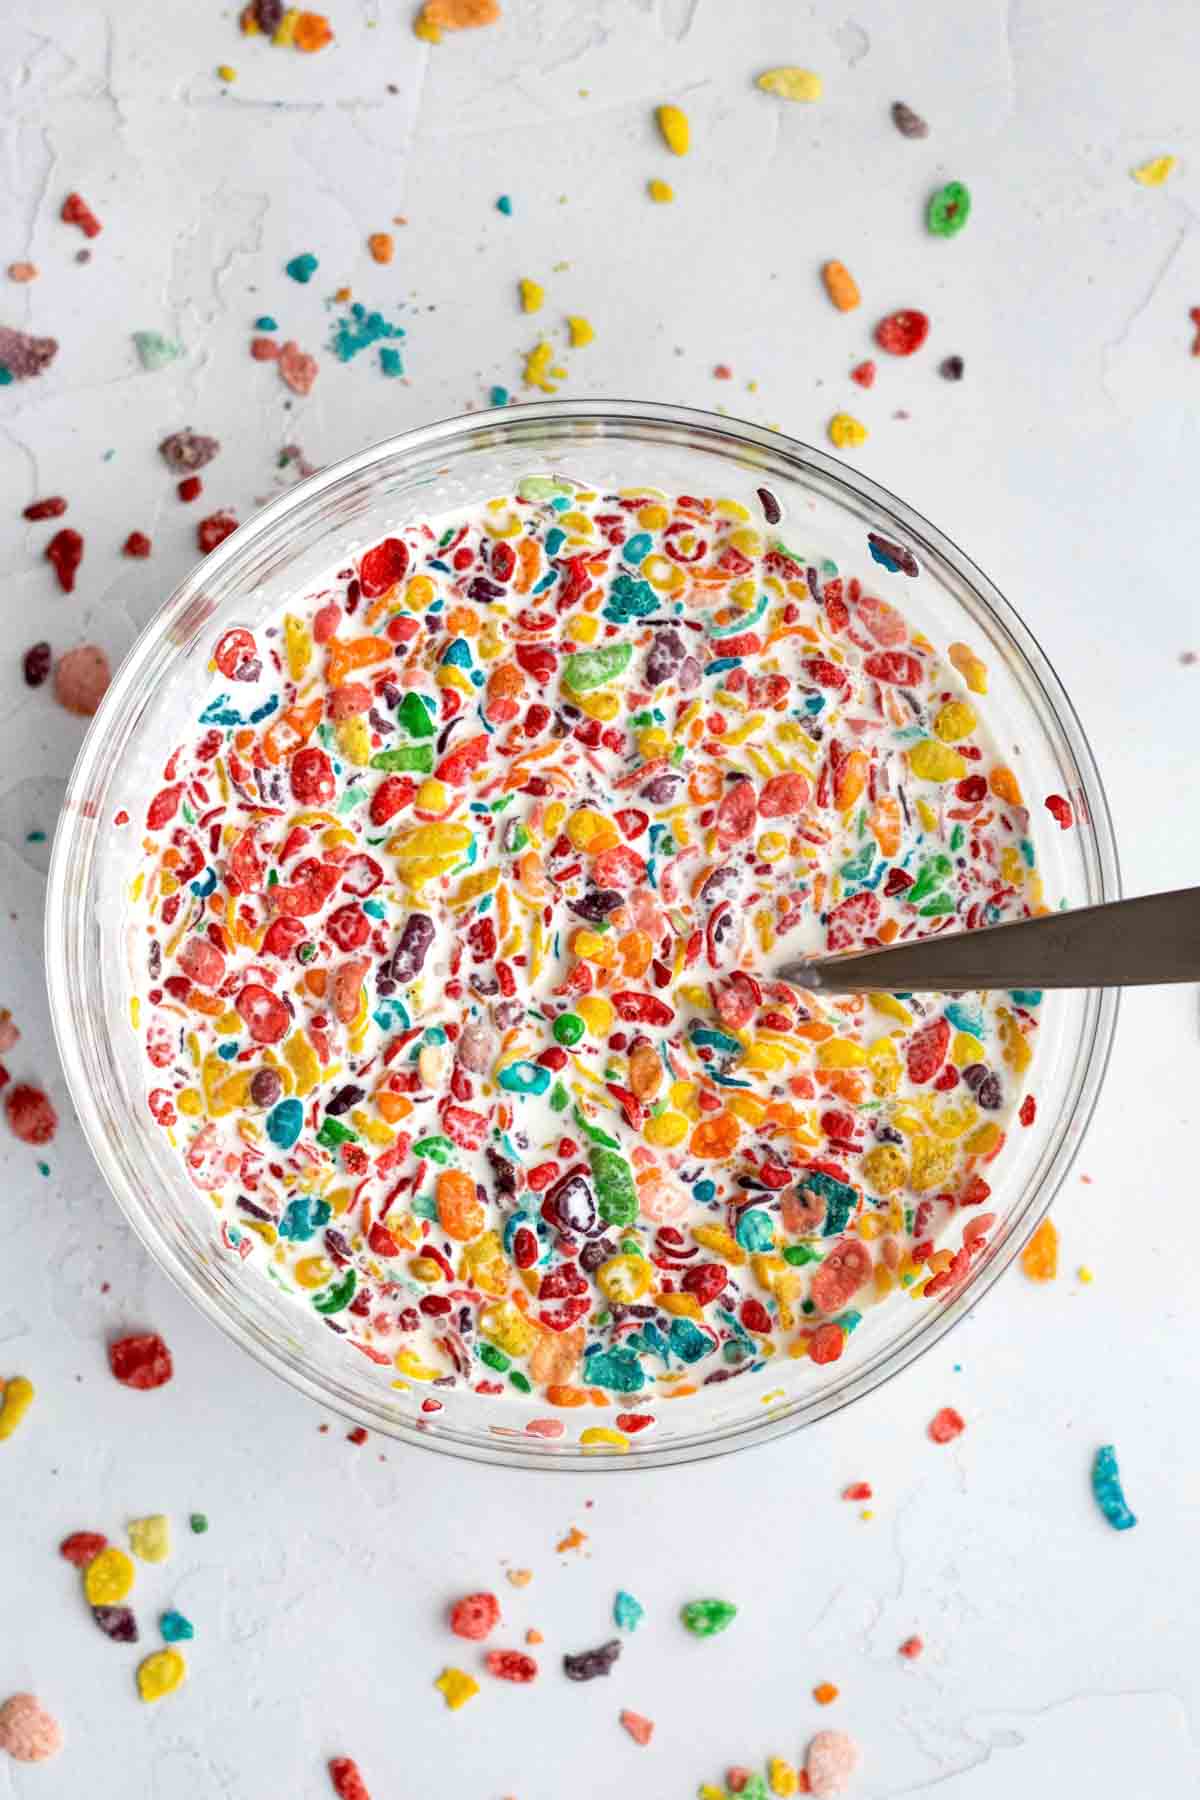 A bowl of Fruity Pebbles in condensed milk.